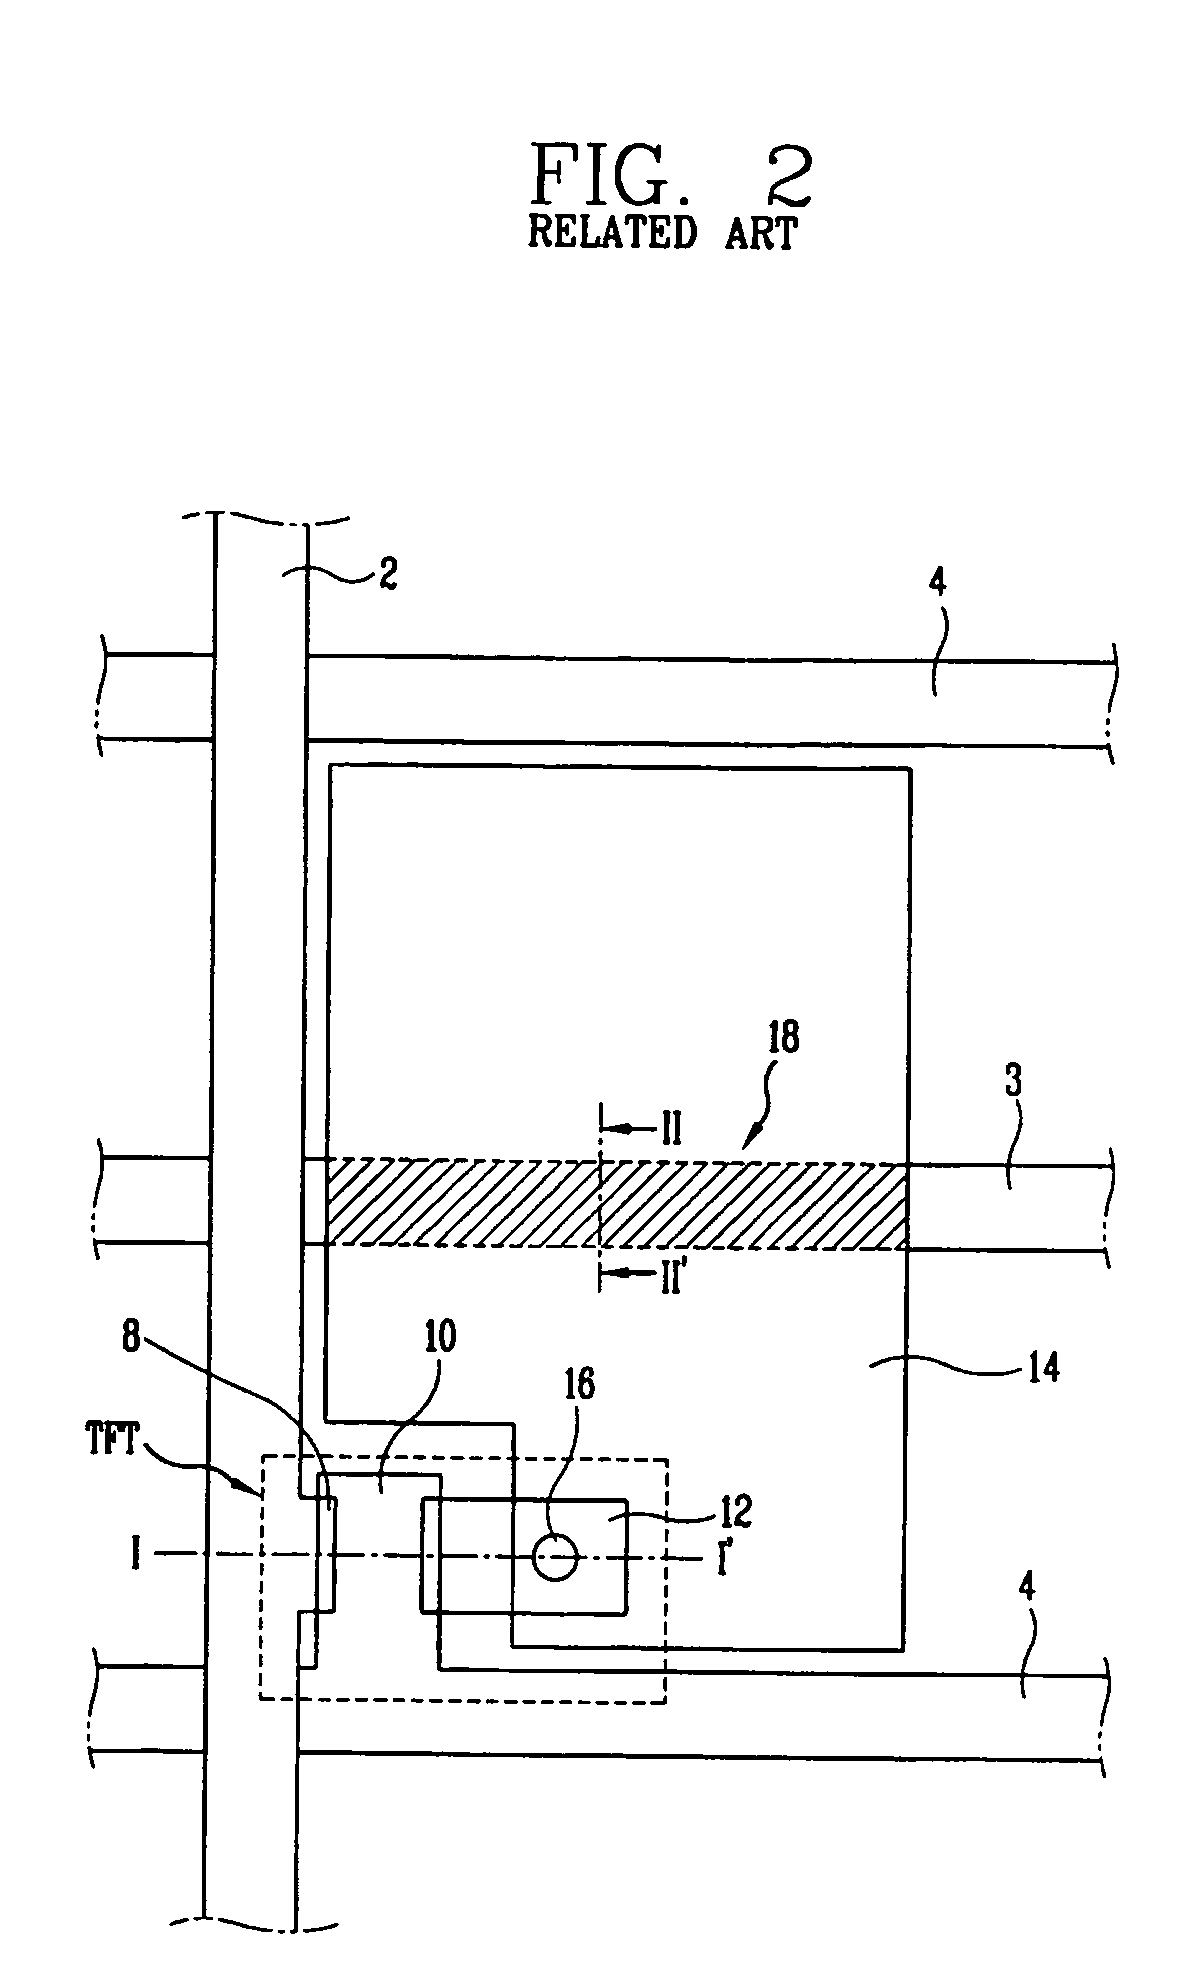 Liquid crystal display device having redundancy repair pattern and method of forming and using the same